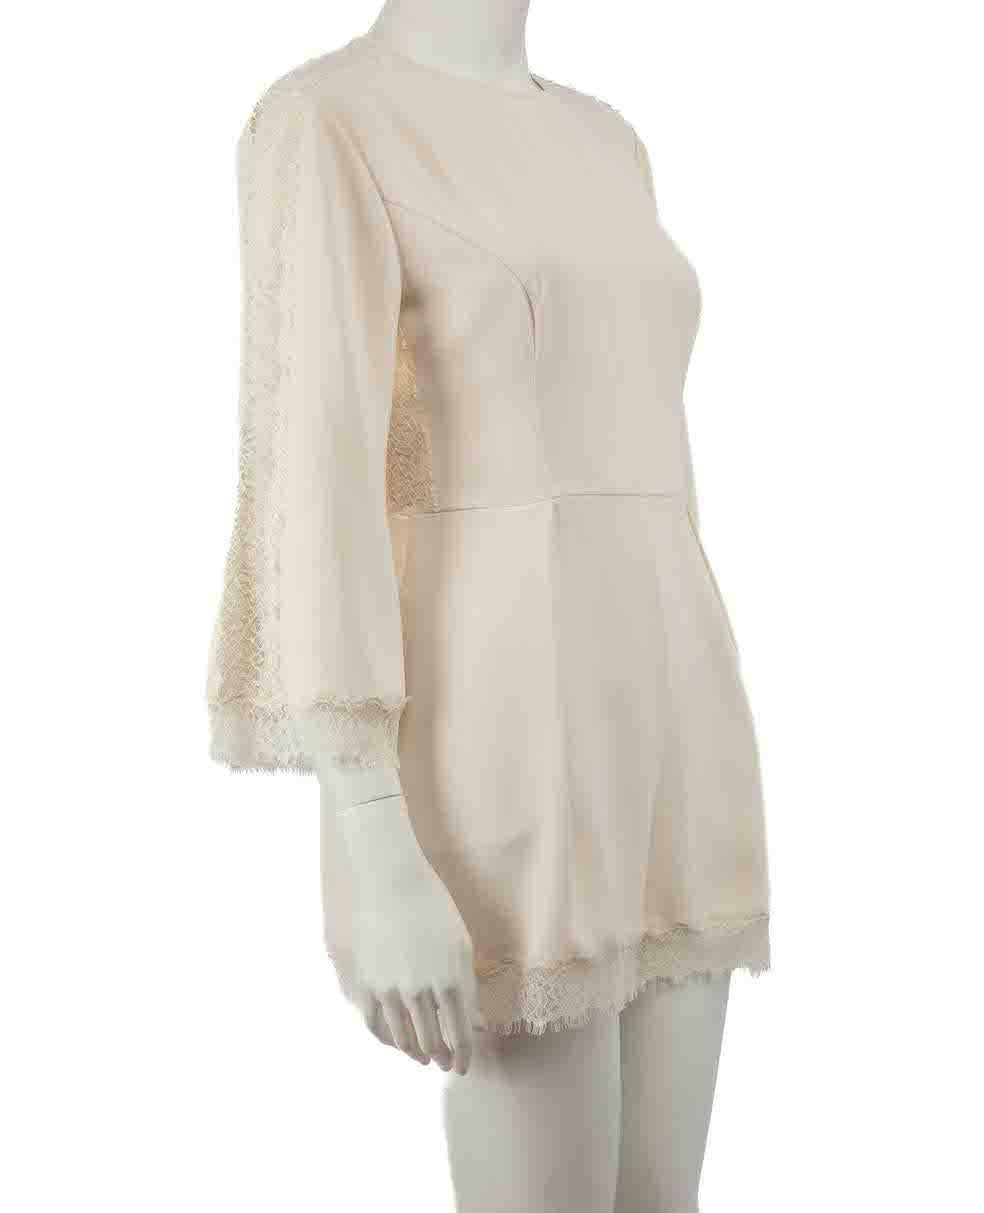 CONDITION is Very good. Hardly any visible wear to jumpsuit is evident on this used Zimmermann designer resale item.
 
 Details
 Ecru
 Polyester
 Playsuit
 Round neck
 Long sleeves
 Lace trim
 2x Side pockets
 Back zip and hook fastening
 
 
 Made